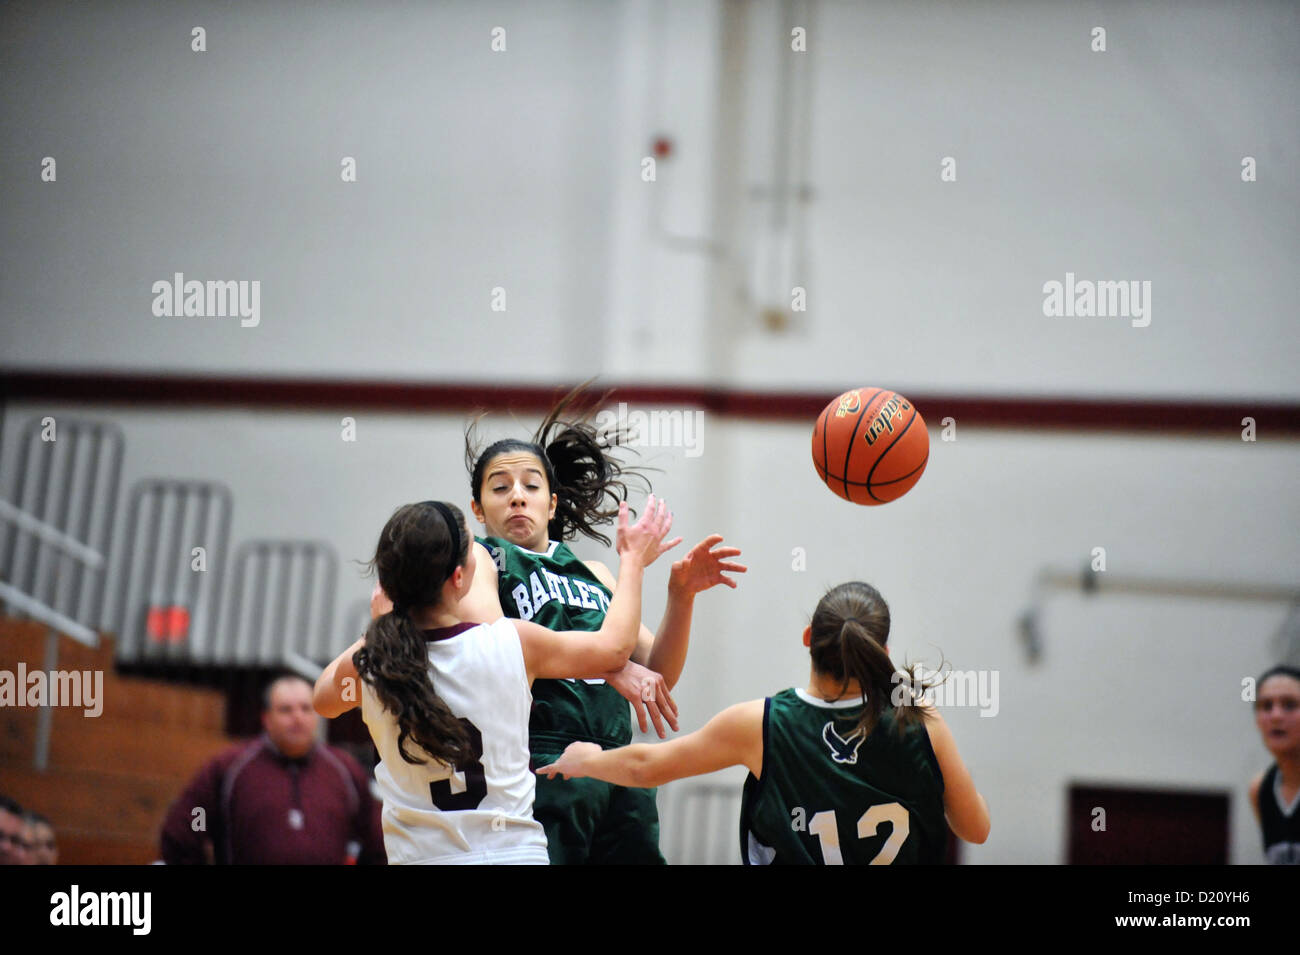 Sport Basketball Female Player Defenders double team a guard trying to bring the ball across center court. USA. Stock Photo